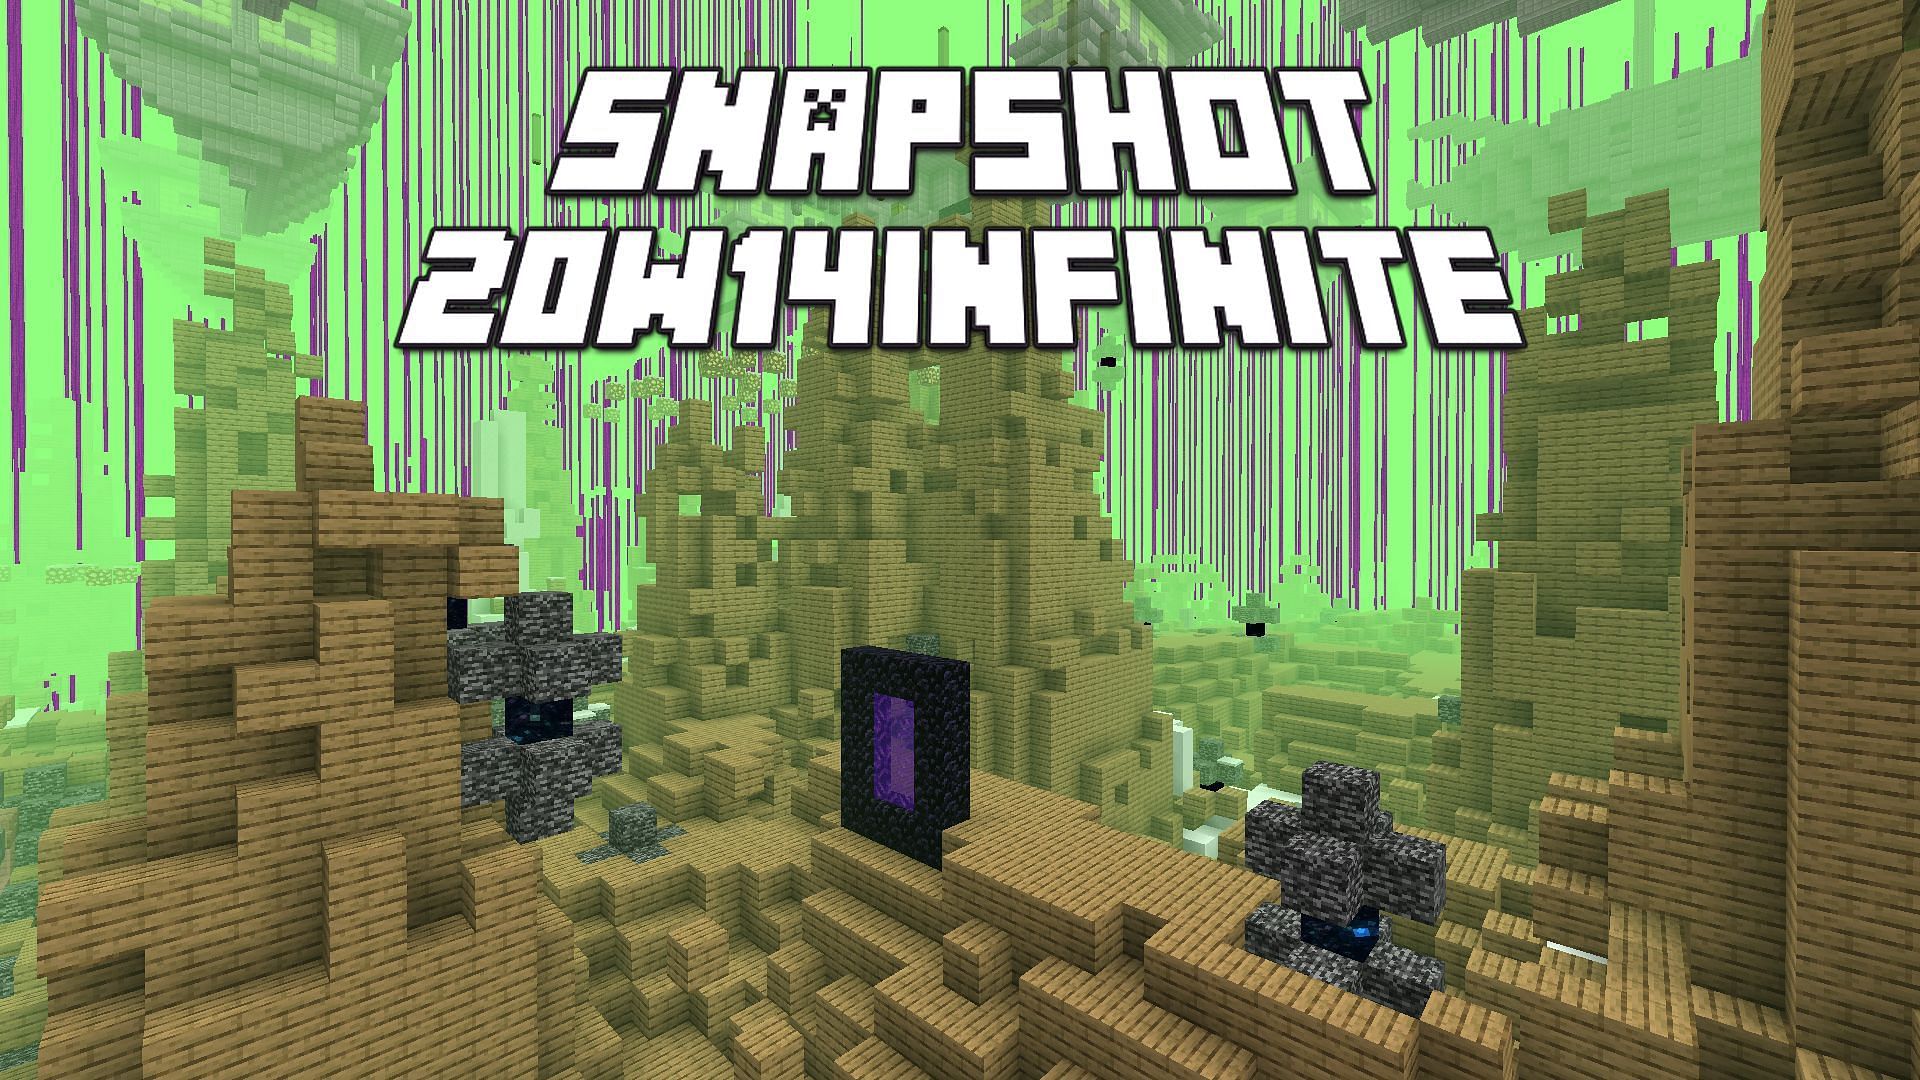 MINECRAFT 2 OFFICIALLY ANNOUNCED + EXCLUSIVE GAMEPLAY (April Fools